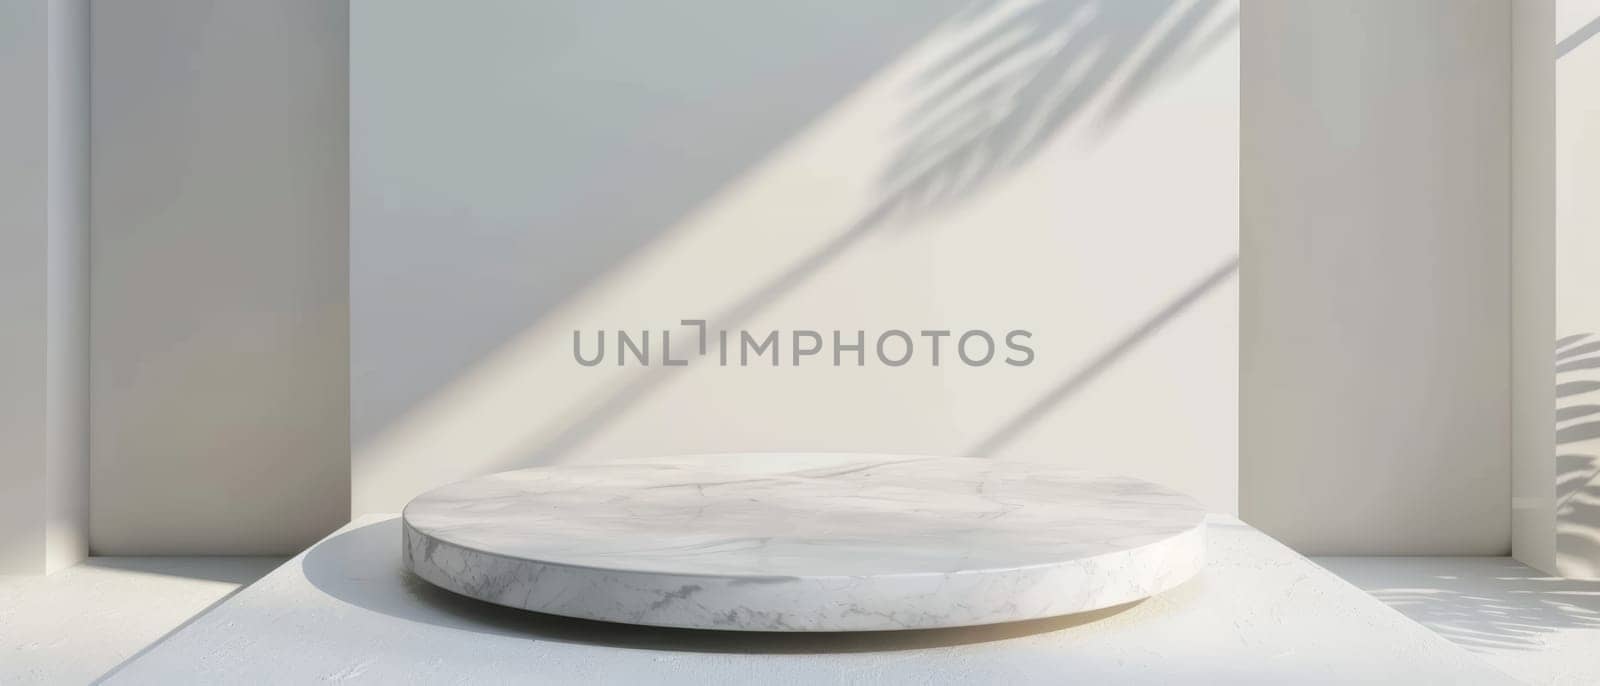 A sleek, minimalist podium made of white marble stands in a bright, airy studio, providing an elegant platform to showcase a product with natural lighting and clean lines